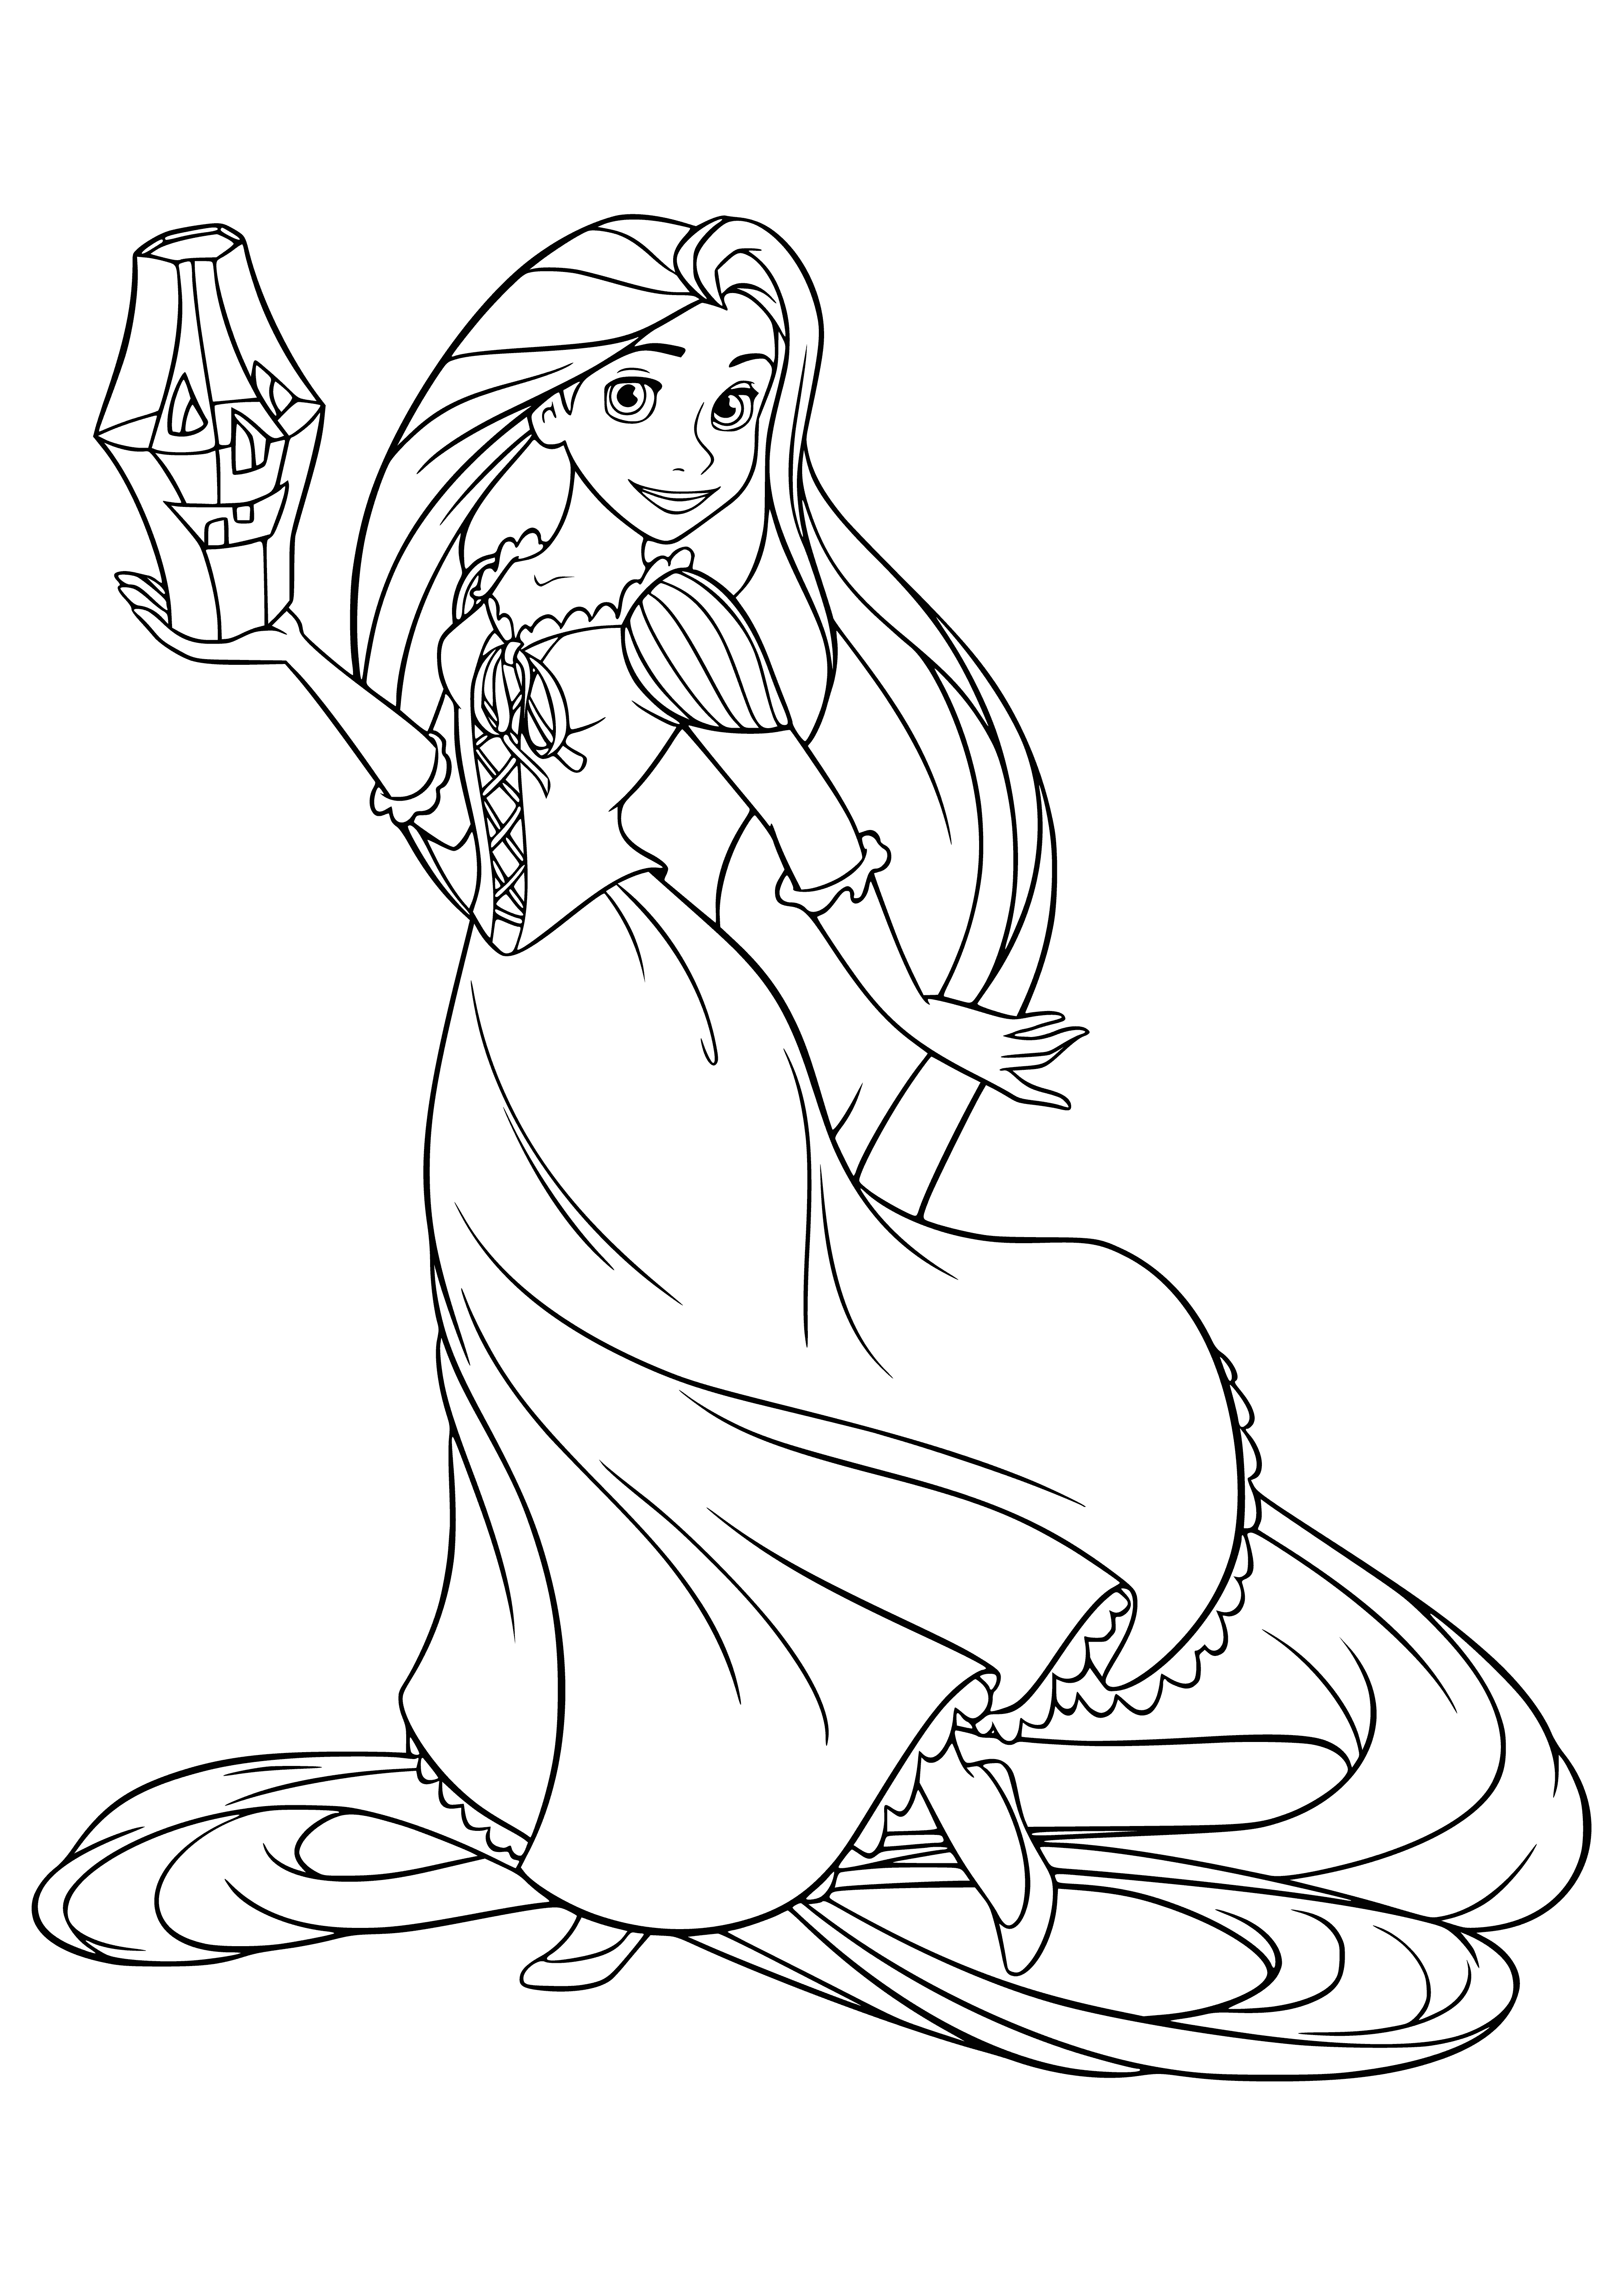 Rapunzel on Halloween coloring page